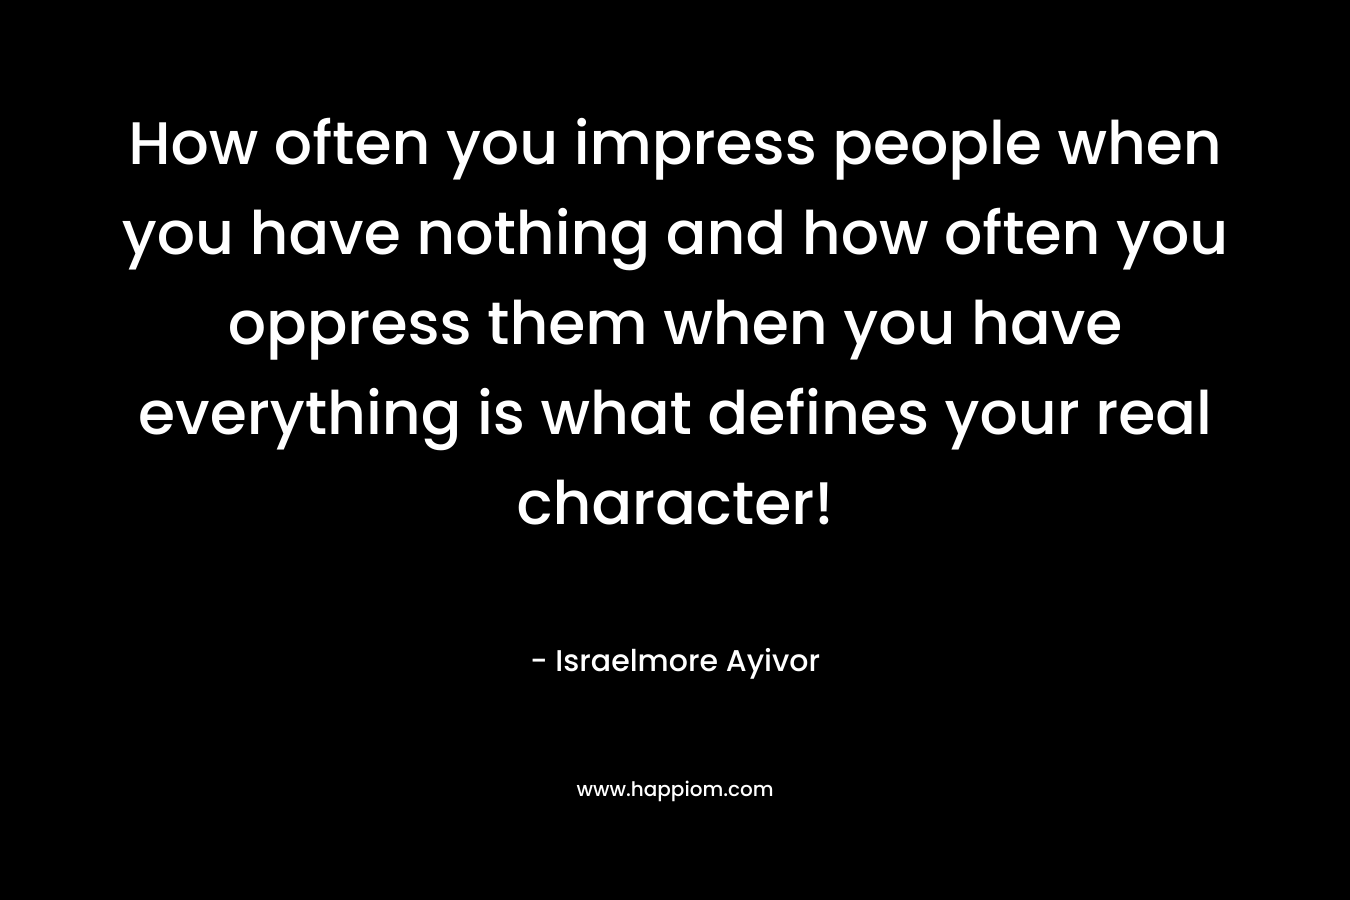 How often you impress people when you have nothing and how often you oppress them when you have everything is what defines your real character! – Israelmore Ayivor